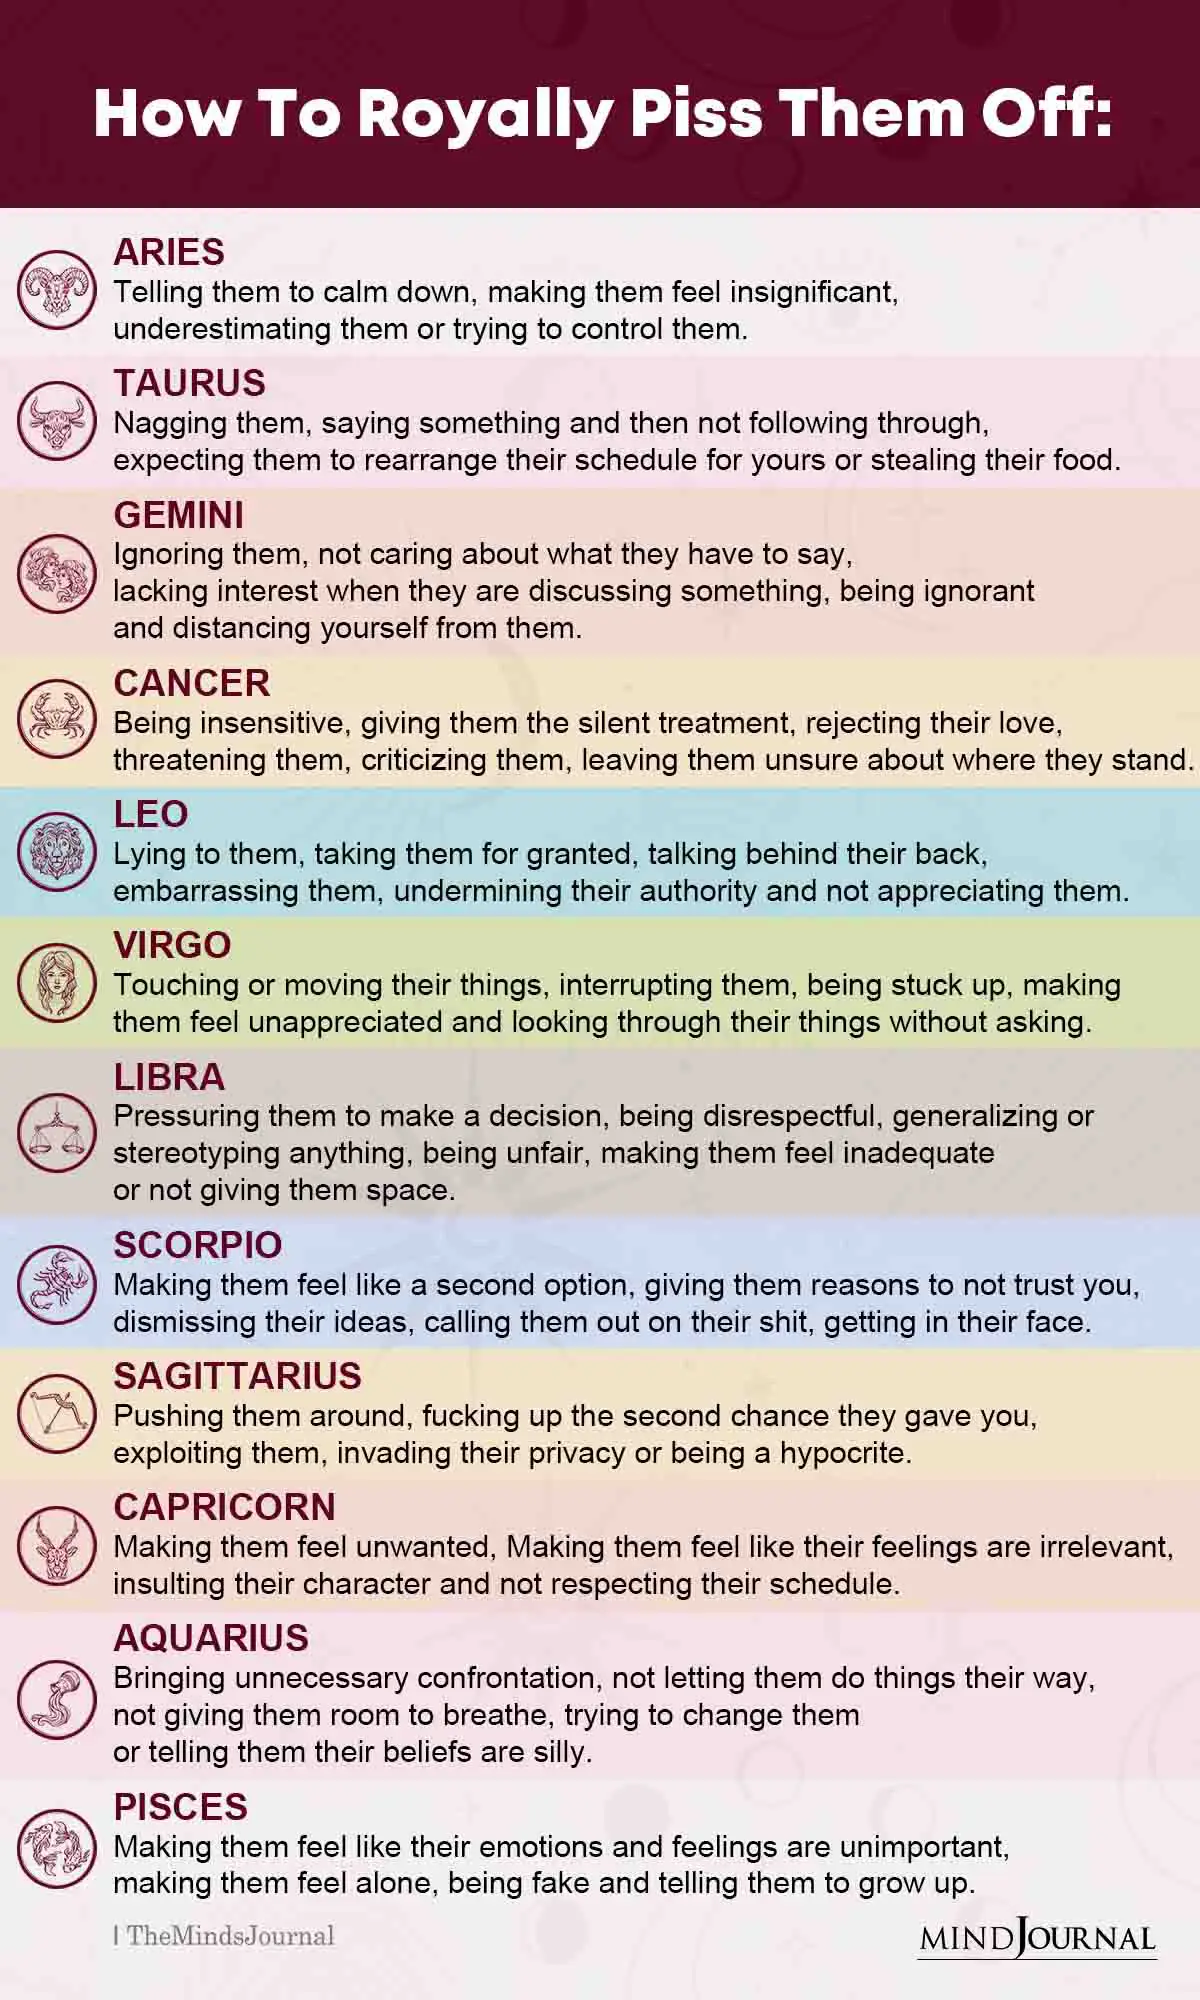 How to Royally Piss Off The Zodiac Signs